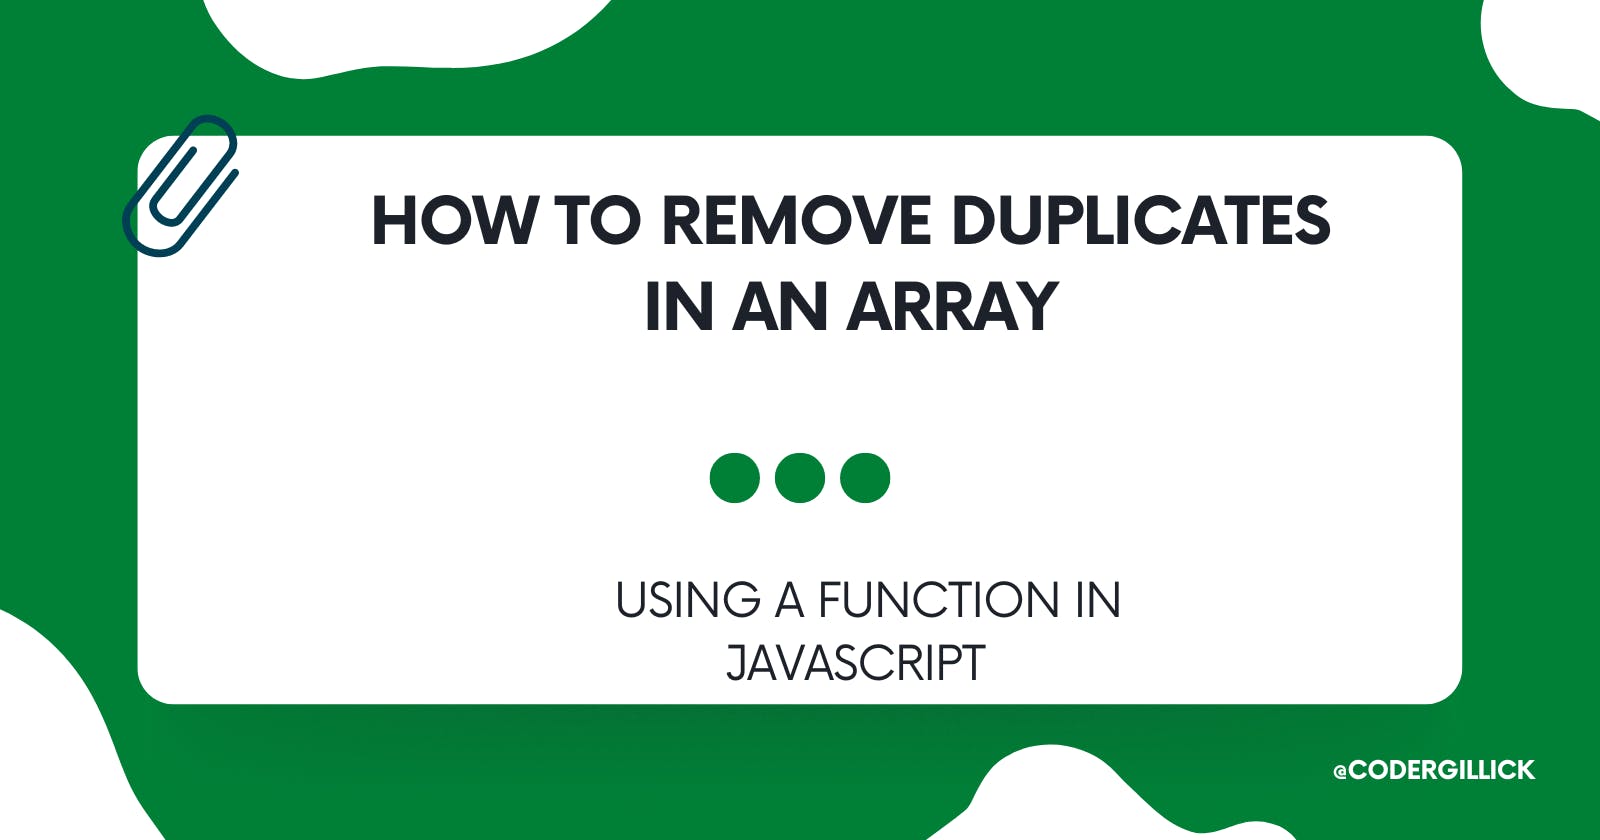 How to remove duplicates in an array.